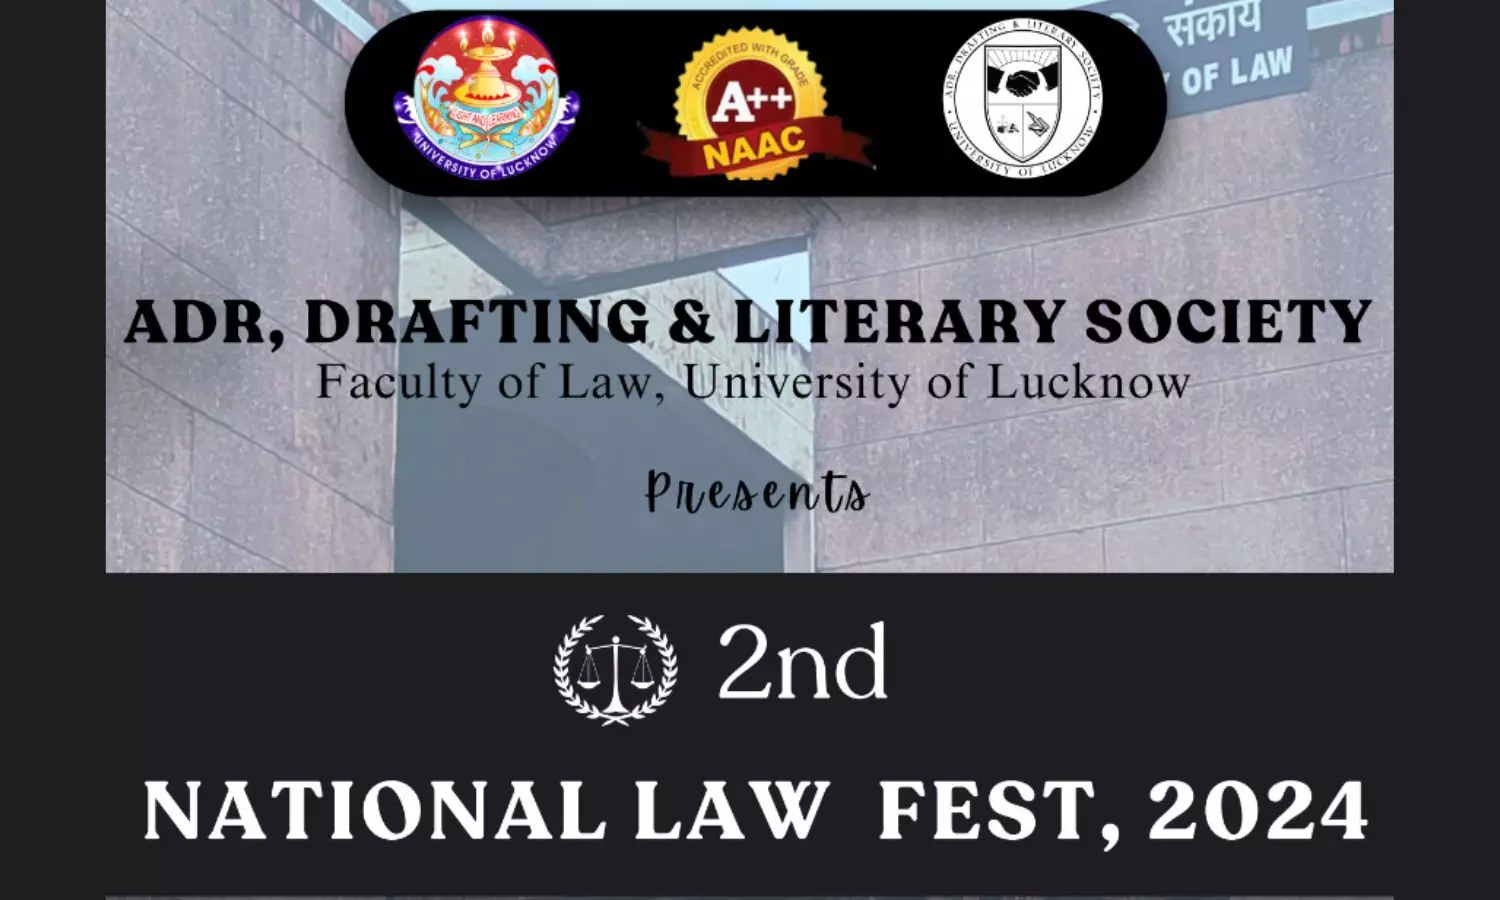 2nd National Law Fest, 2024 | Faculty of Law, University of Lucknow